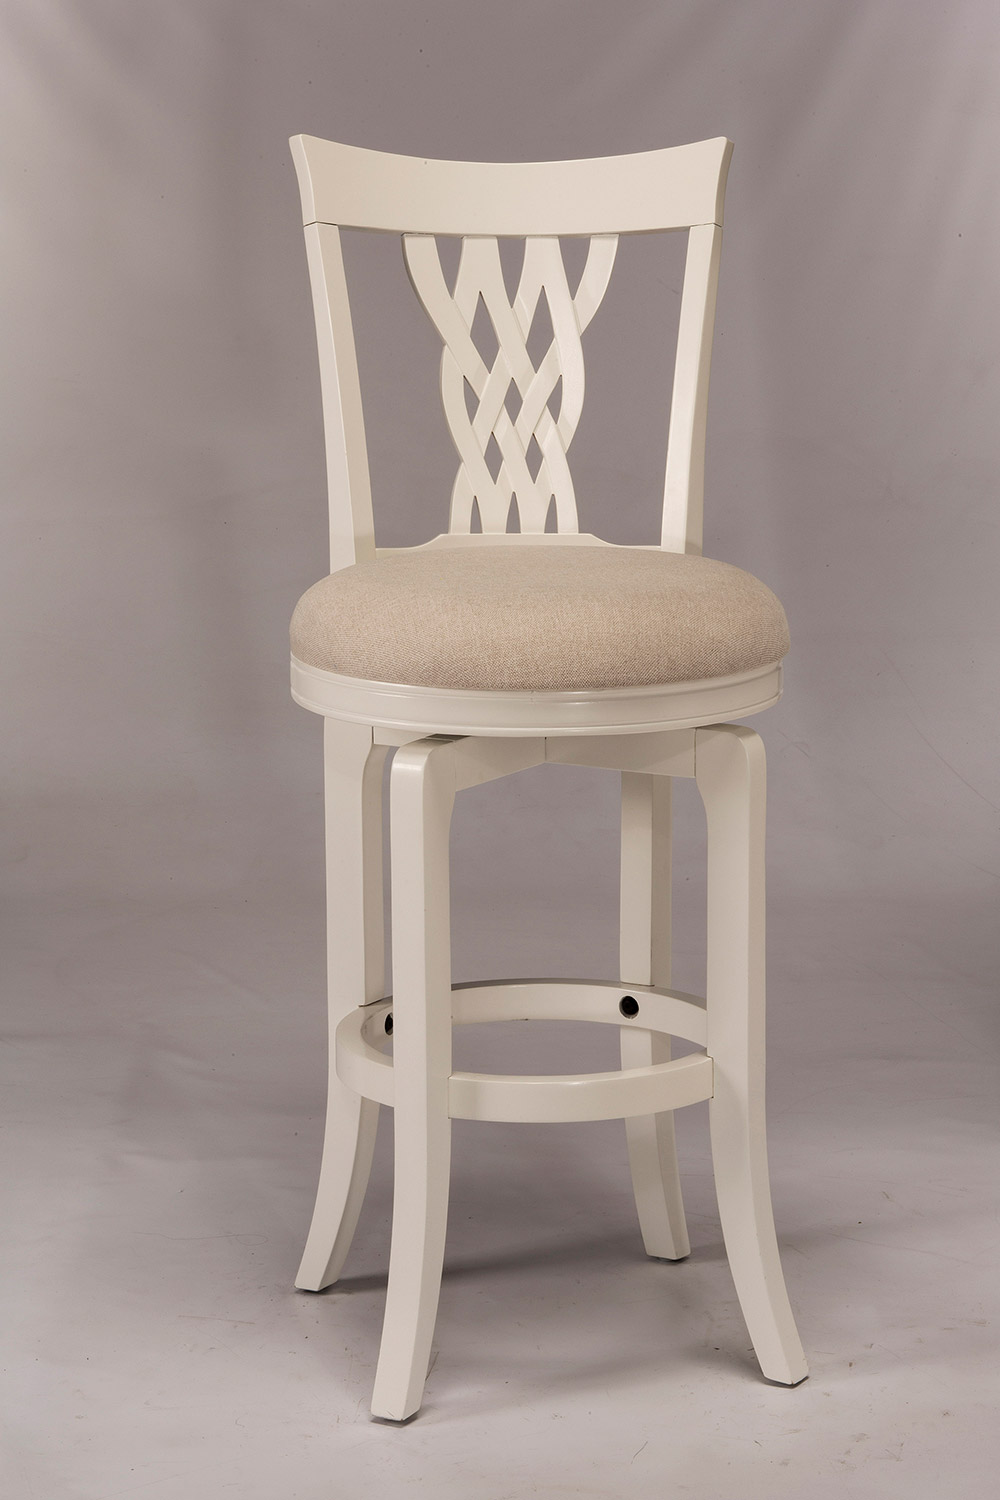 Hillsdale Embassy Swivel Counter Stool - White HD-5753-826 at